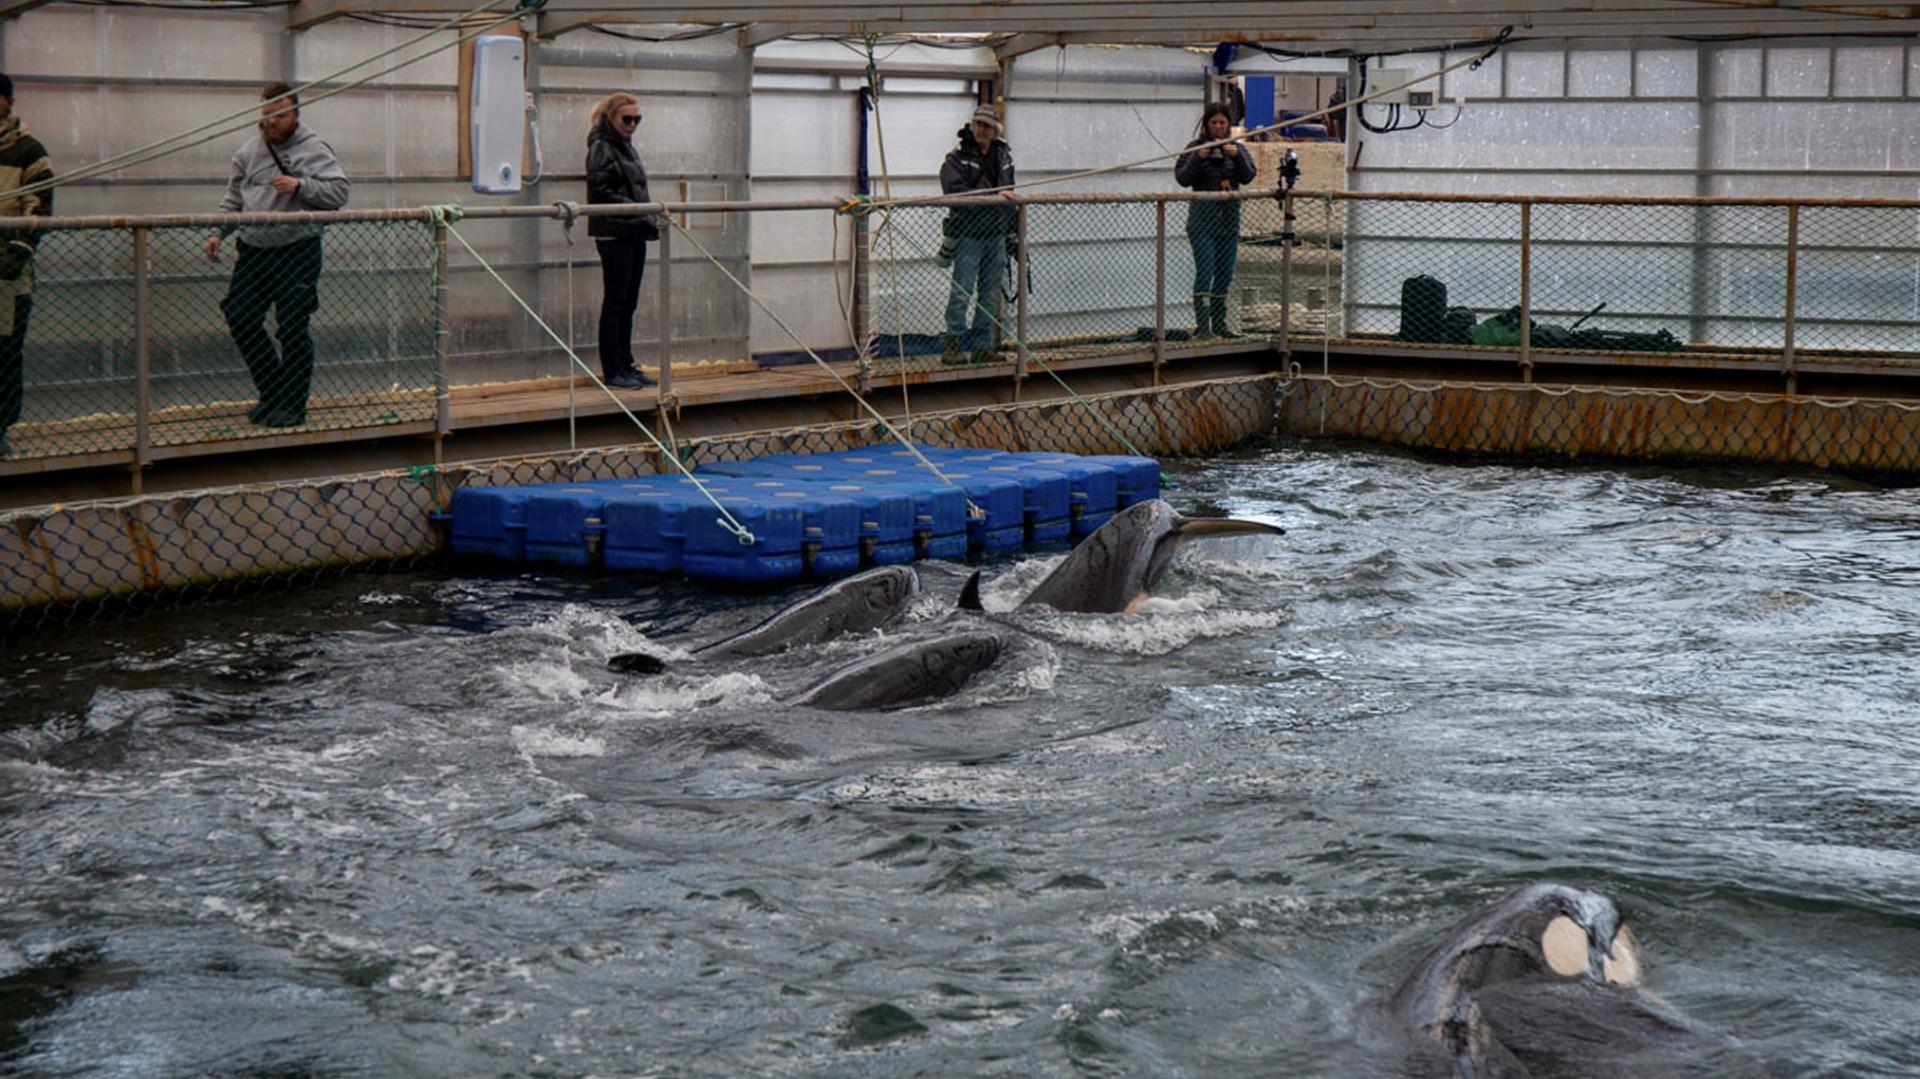 Several whales are seen swimming in the water in a tiny pool surrounded by decking where people are standing